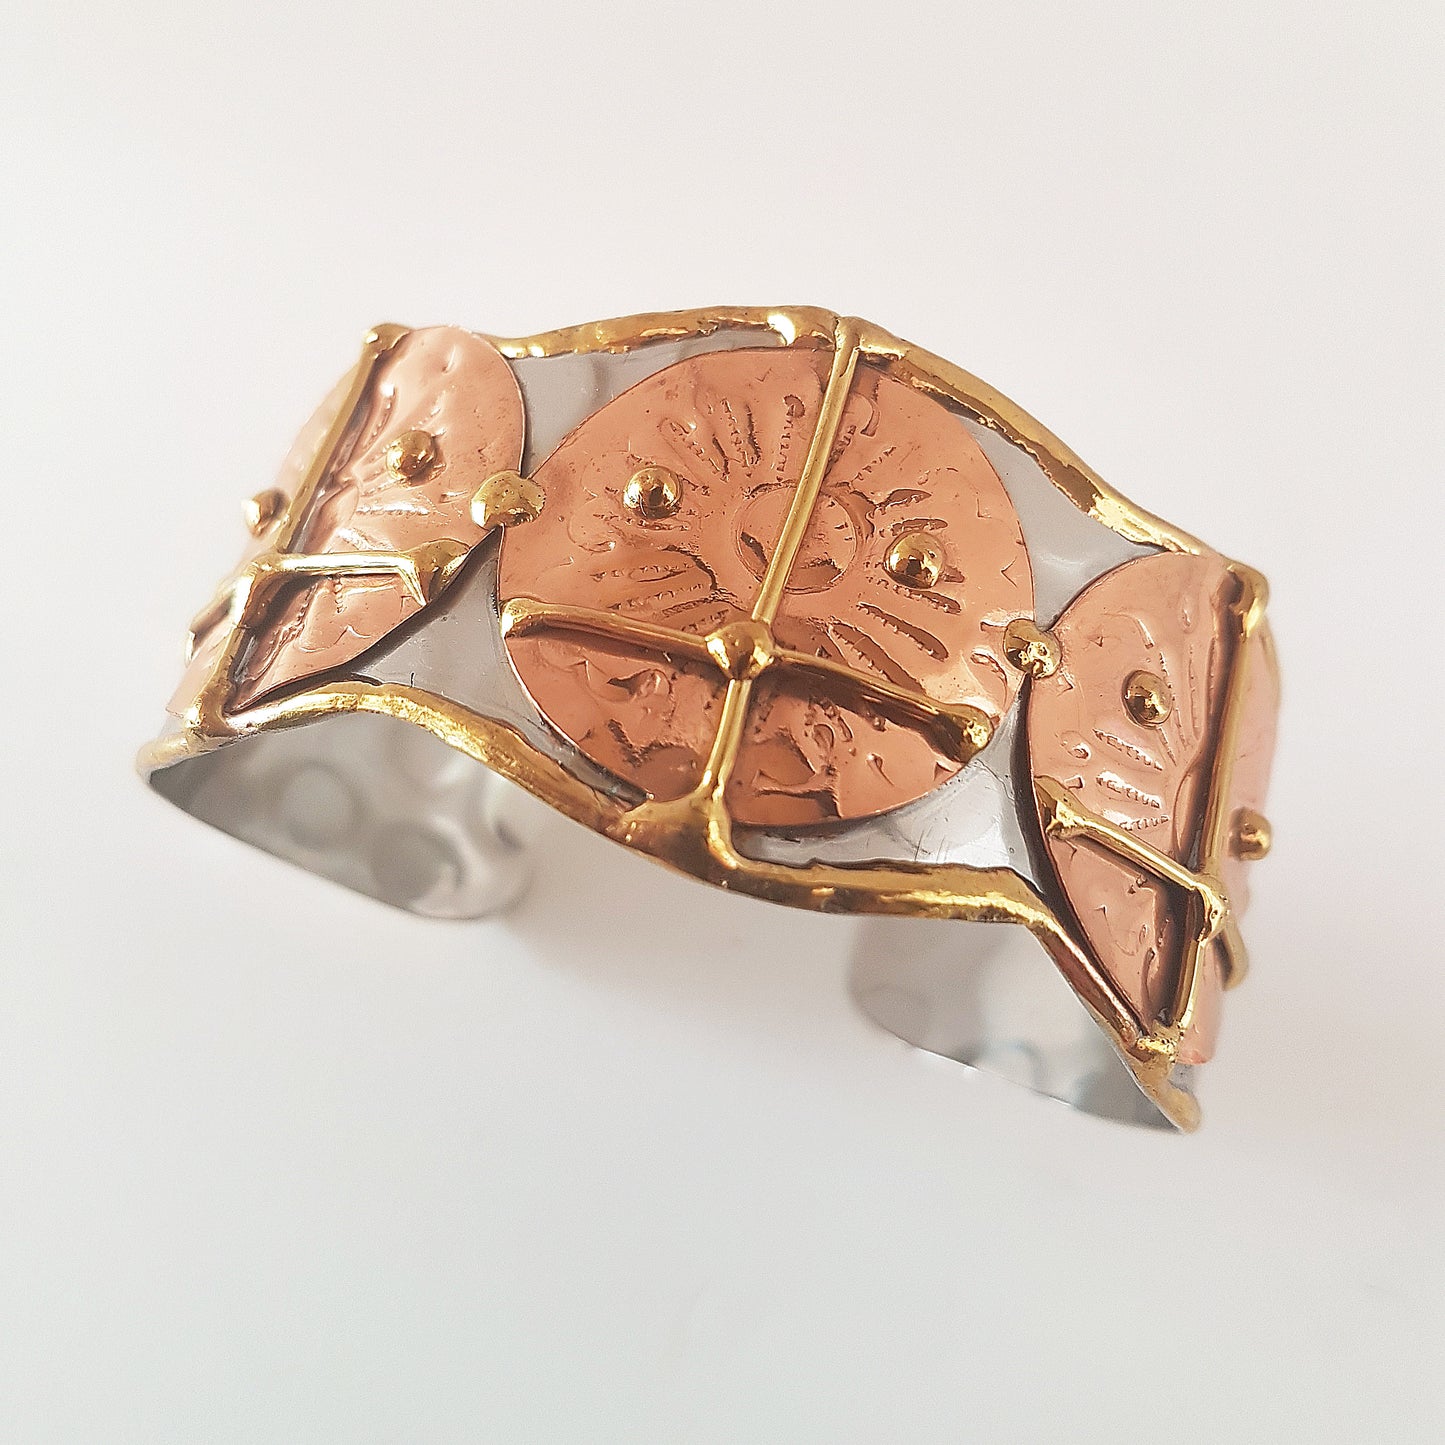 Silver cuff bracelet with a hammered mixed metal design.